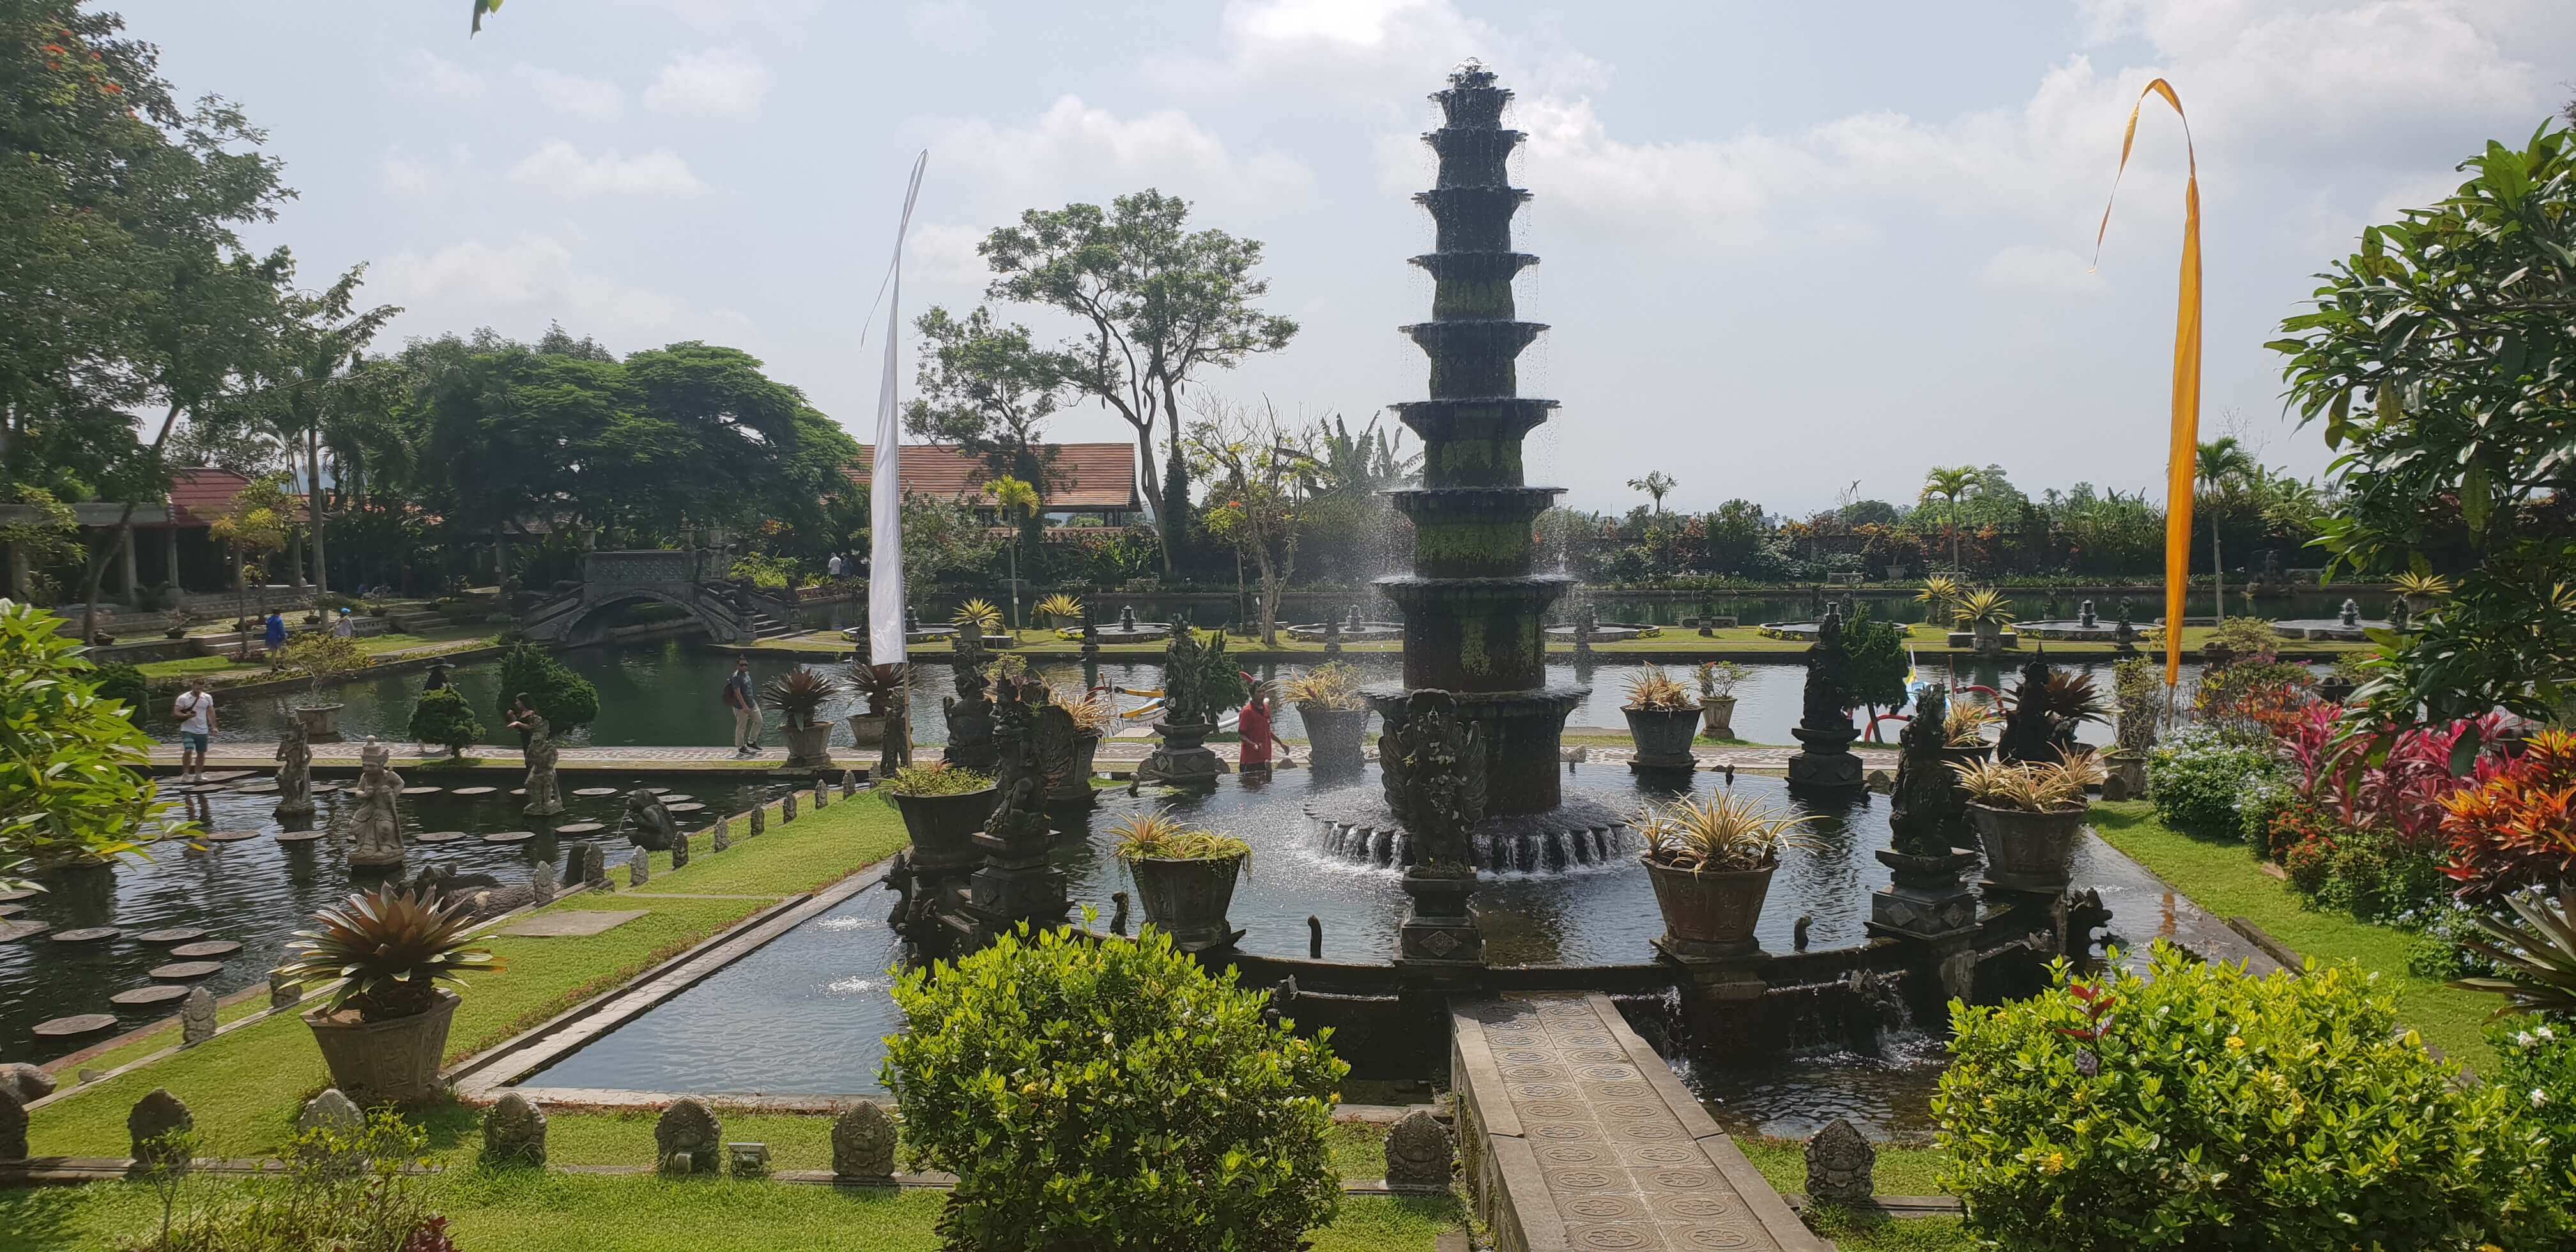 The green gardens with the fountains and pools provide for a picturesque setting, making the water palace a must-visit in the Ubud itinerary